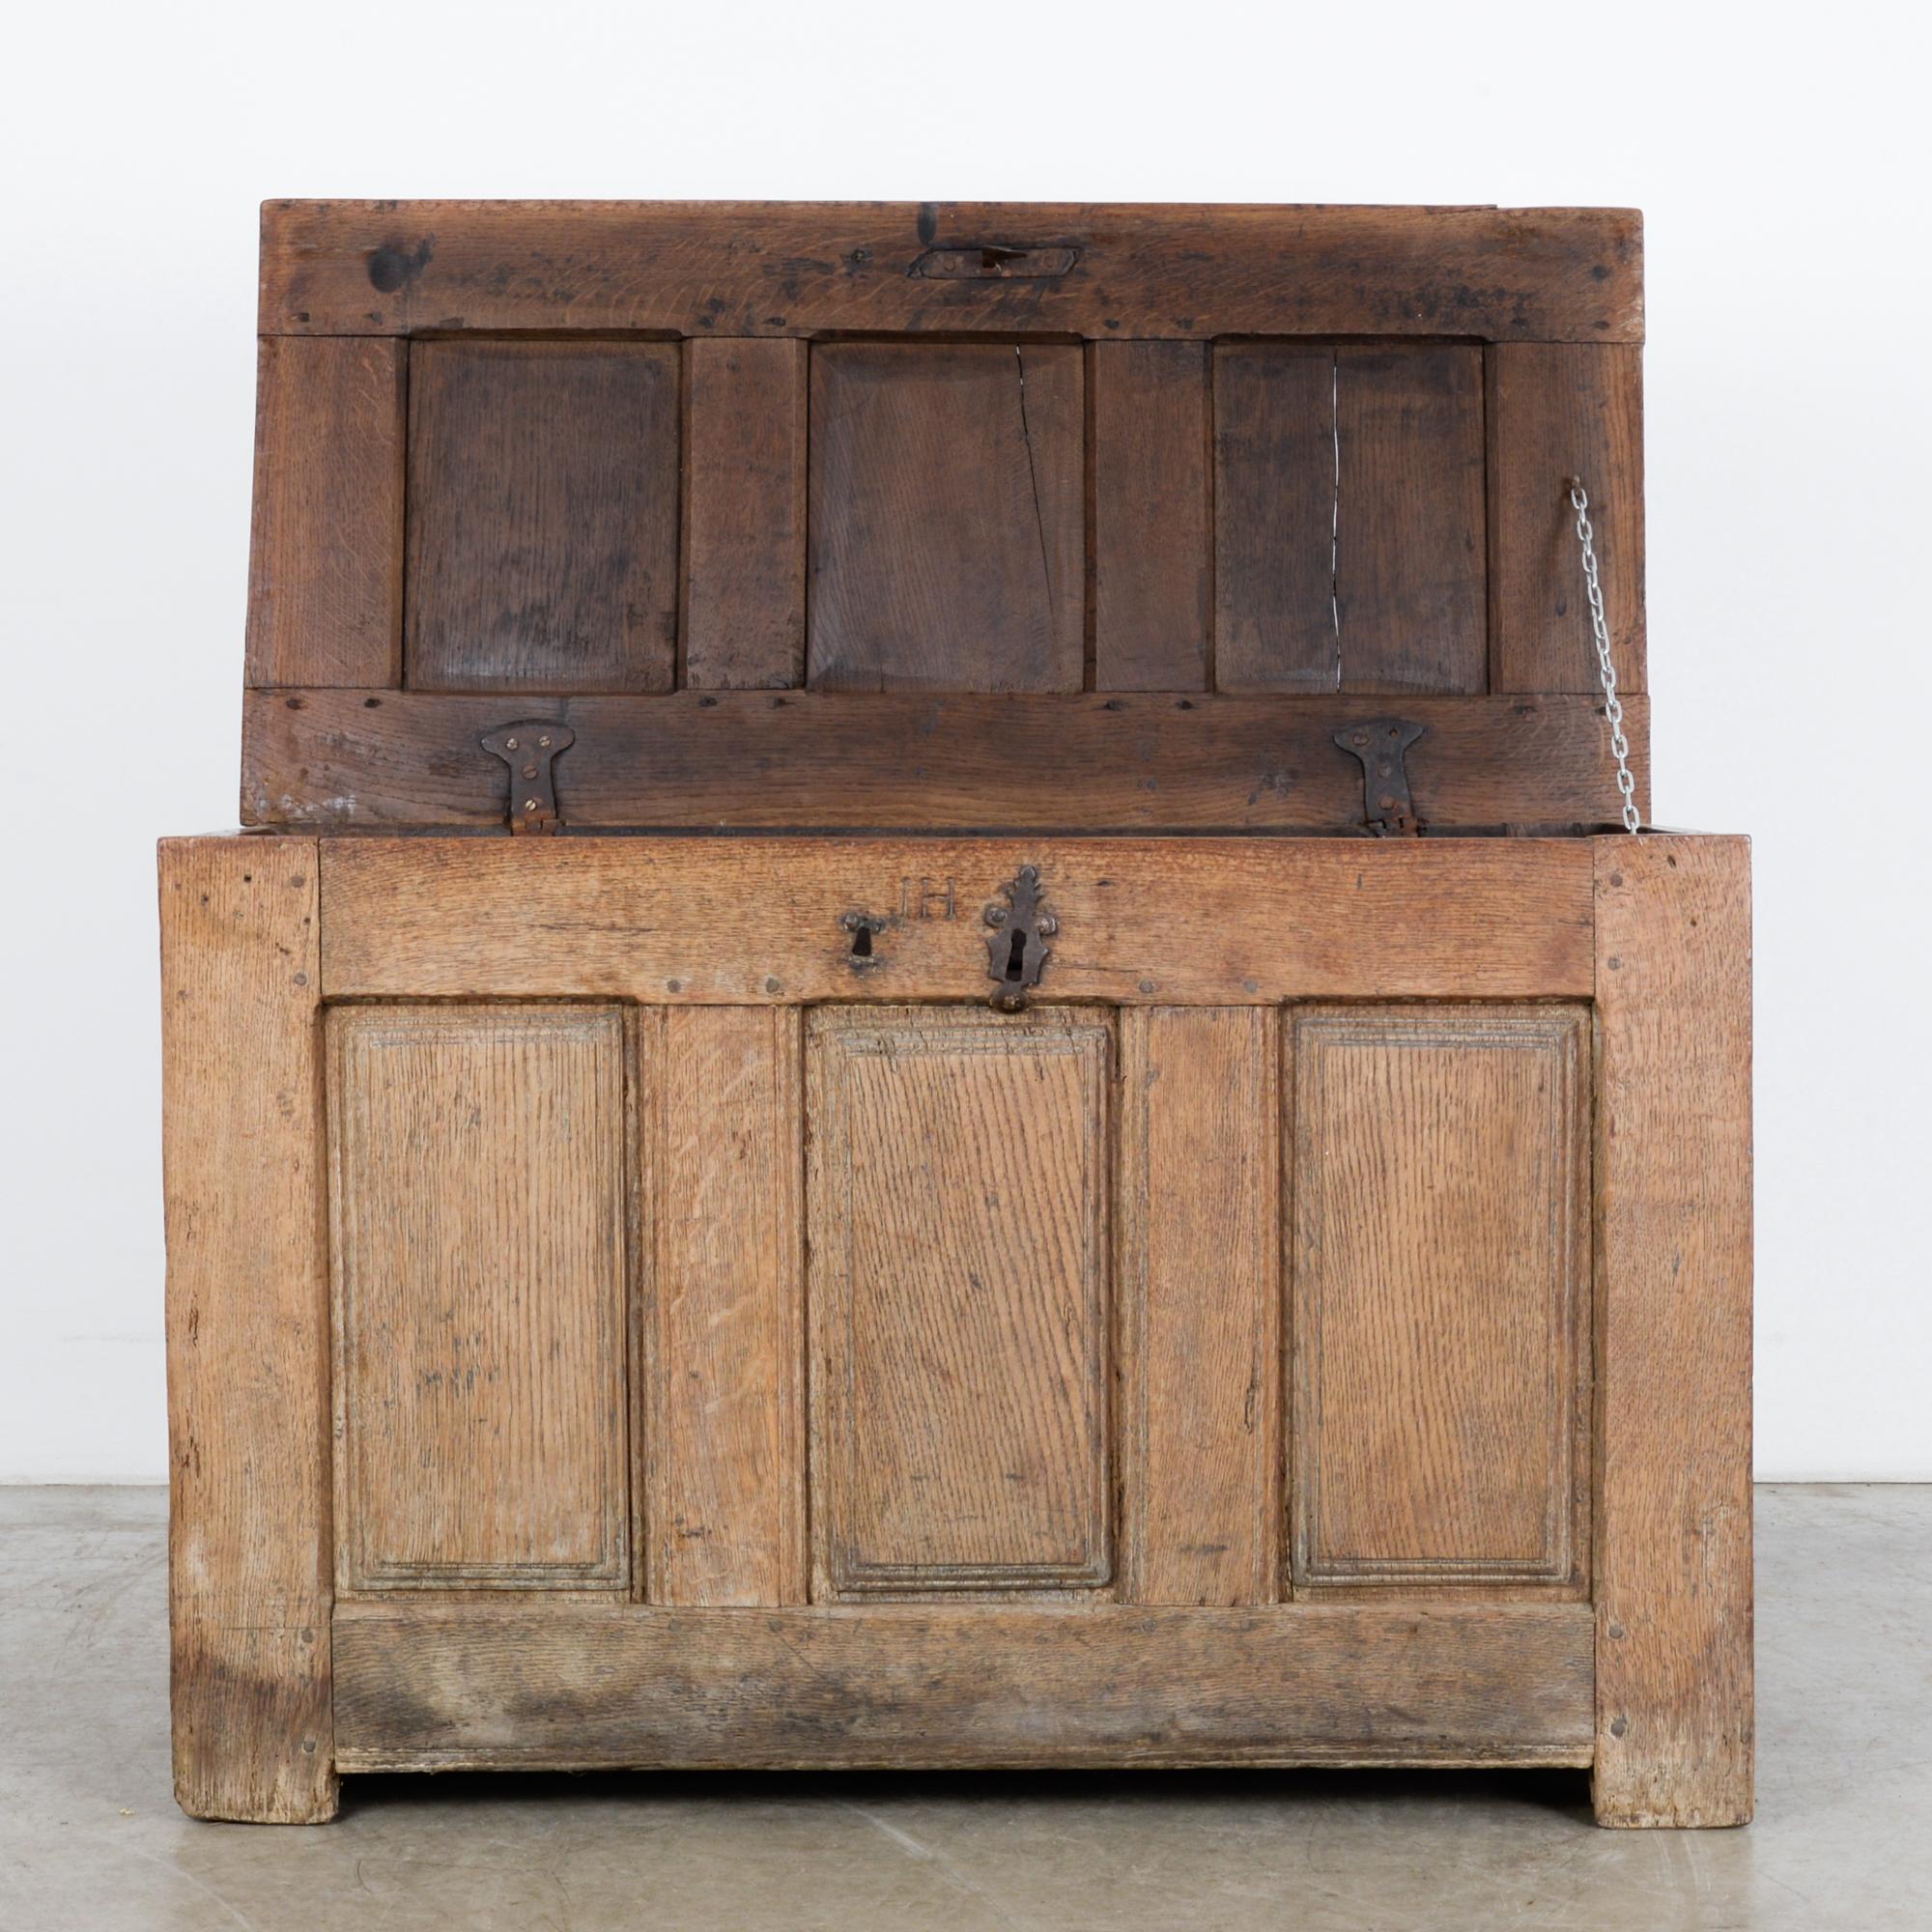 French Provincial 1820s French Wooden Trunk